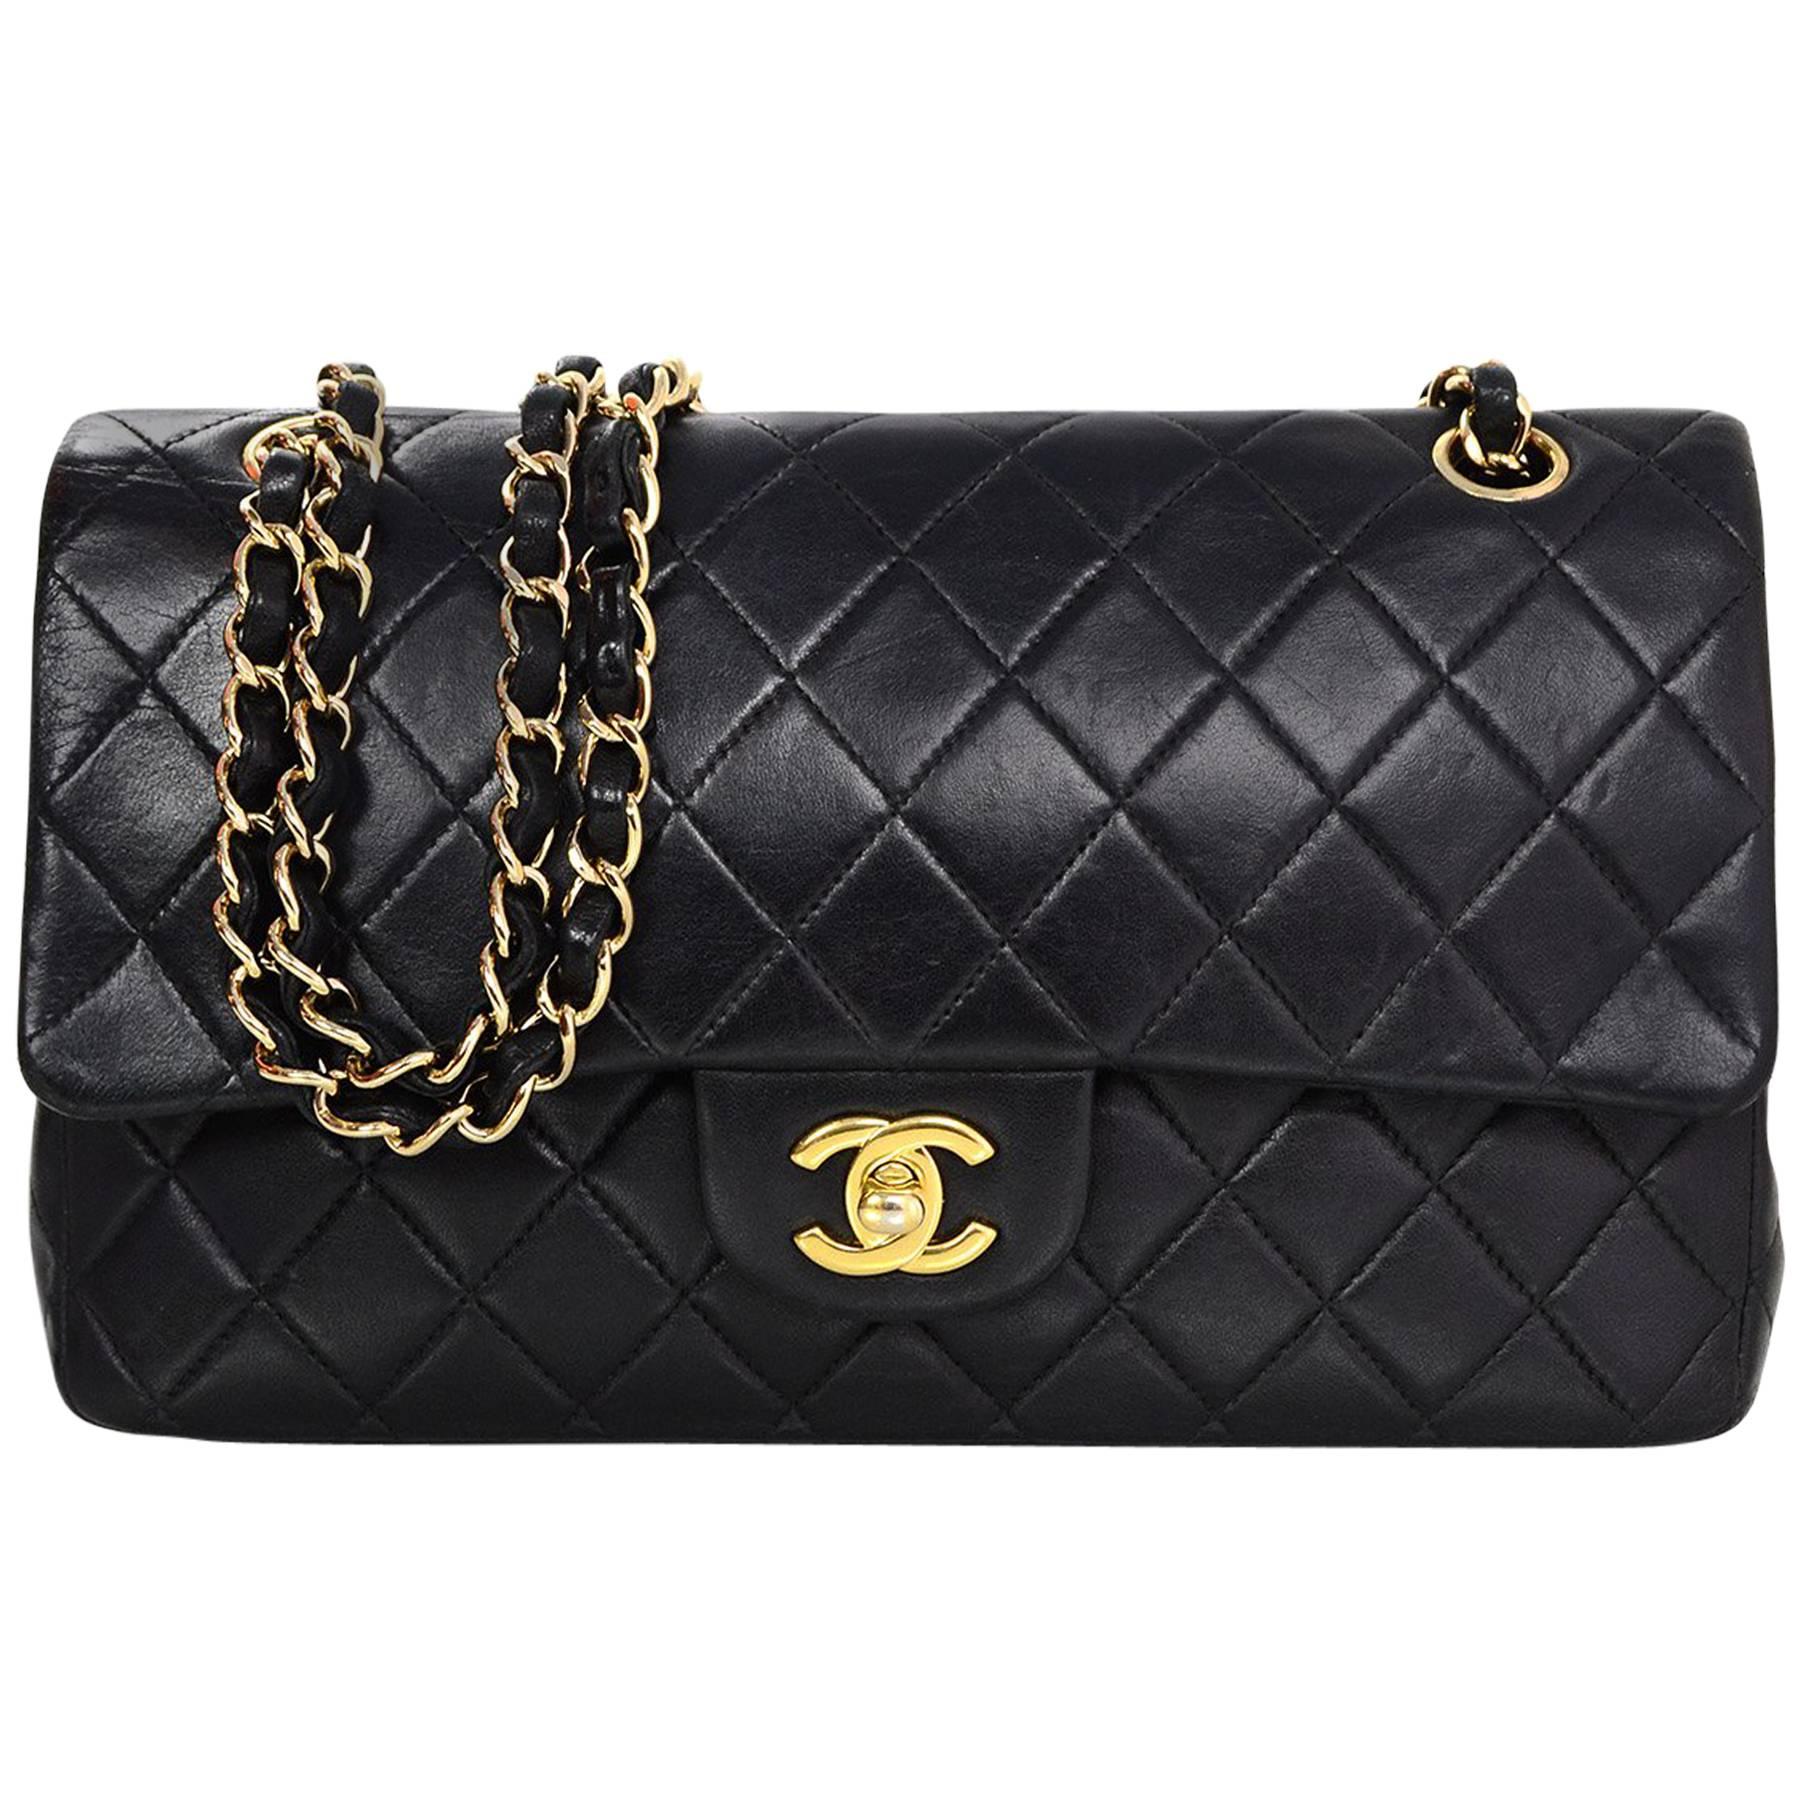 Chanel Black Lambskin Leather Quilted Classic Medium 10" Double Flap Bag